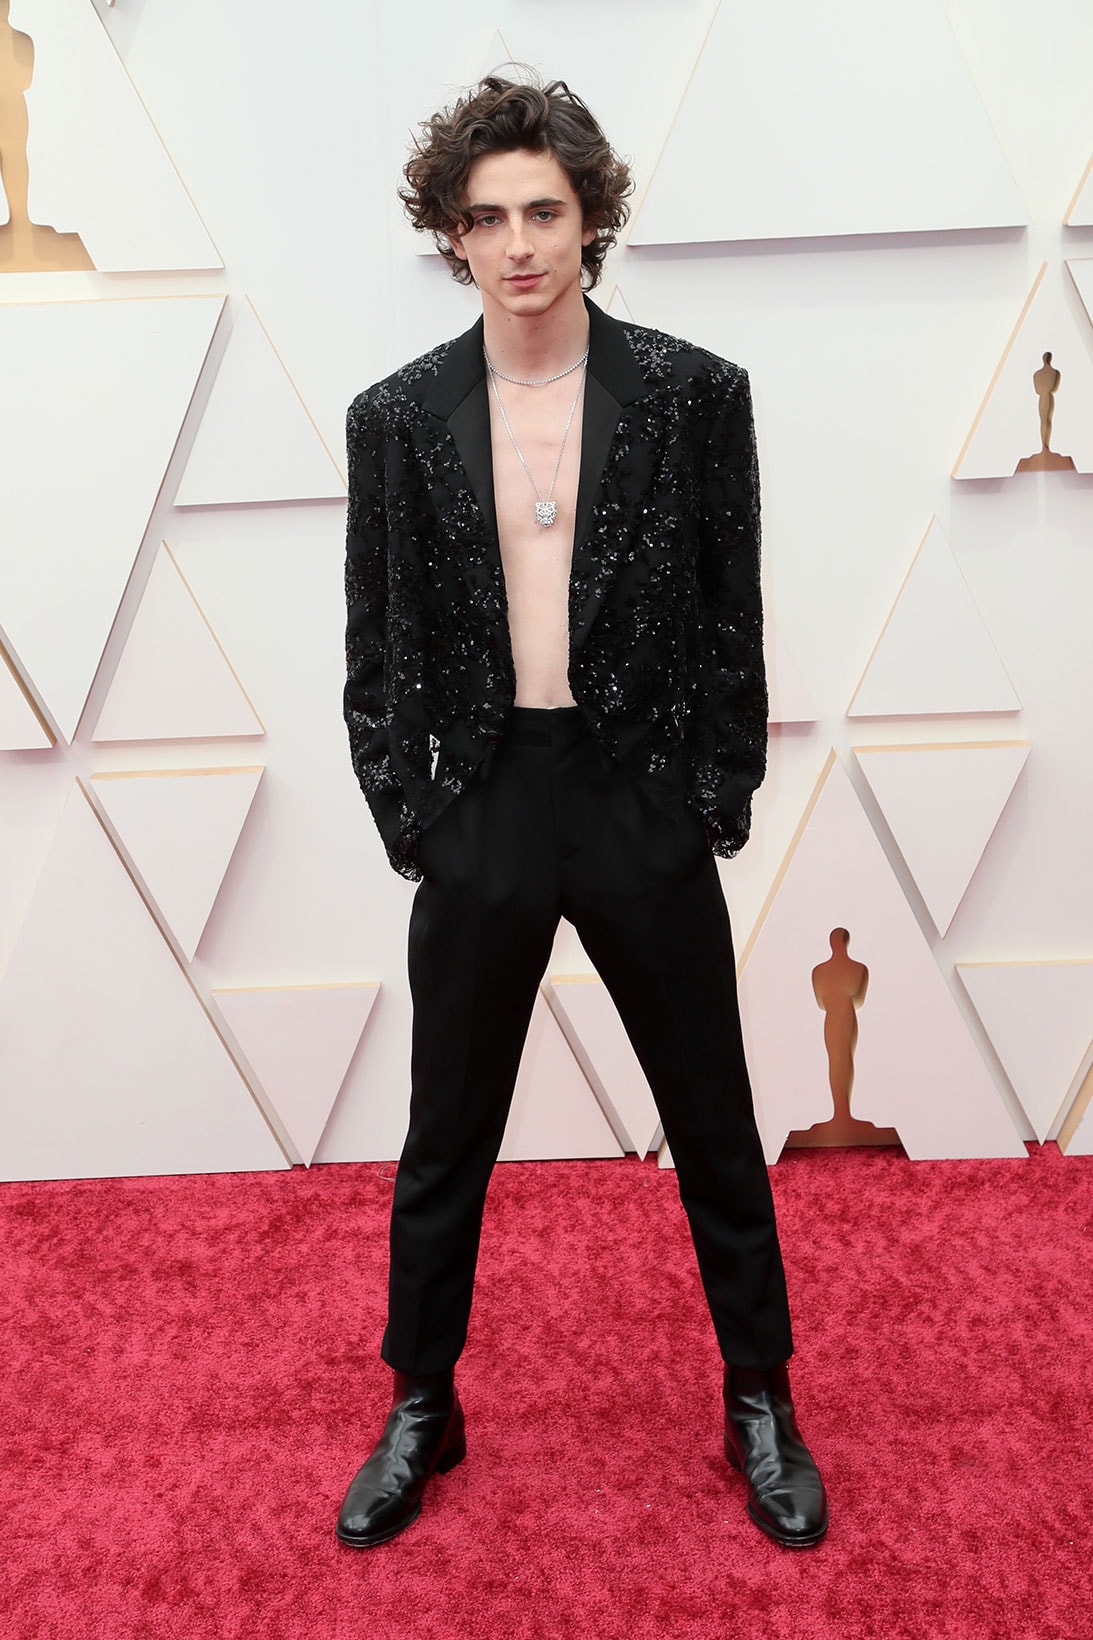 Timothee Chalamet Shirtless Outfit Louis Vuitton Womenswear Oscars 94th Academy Awards